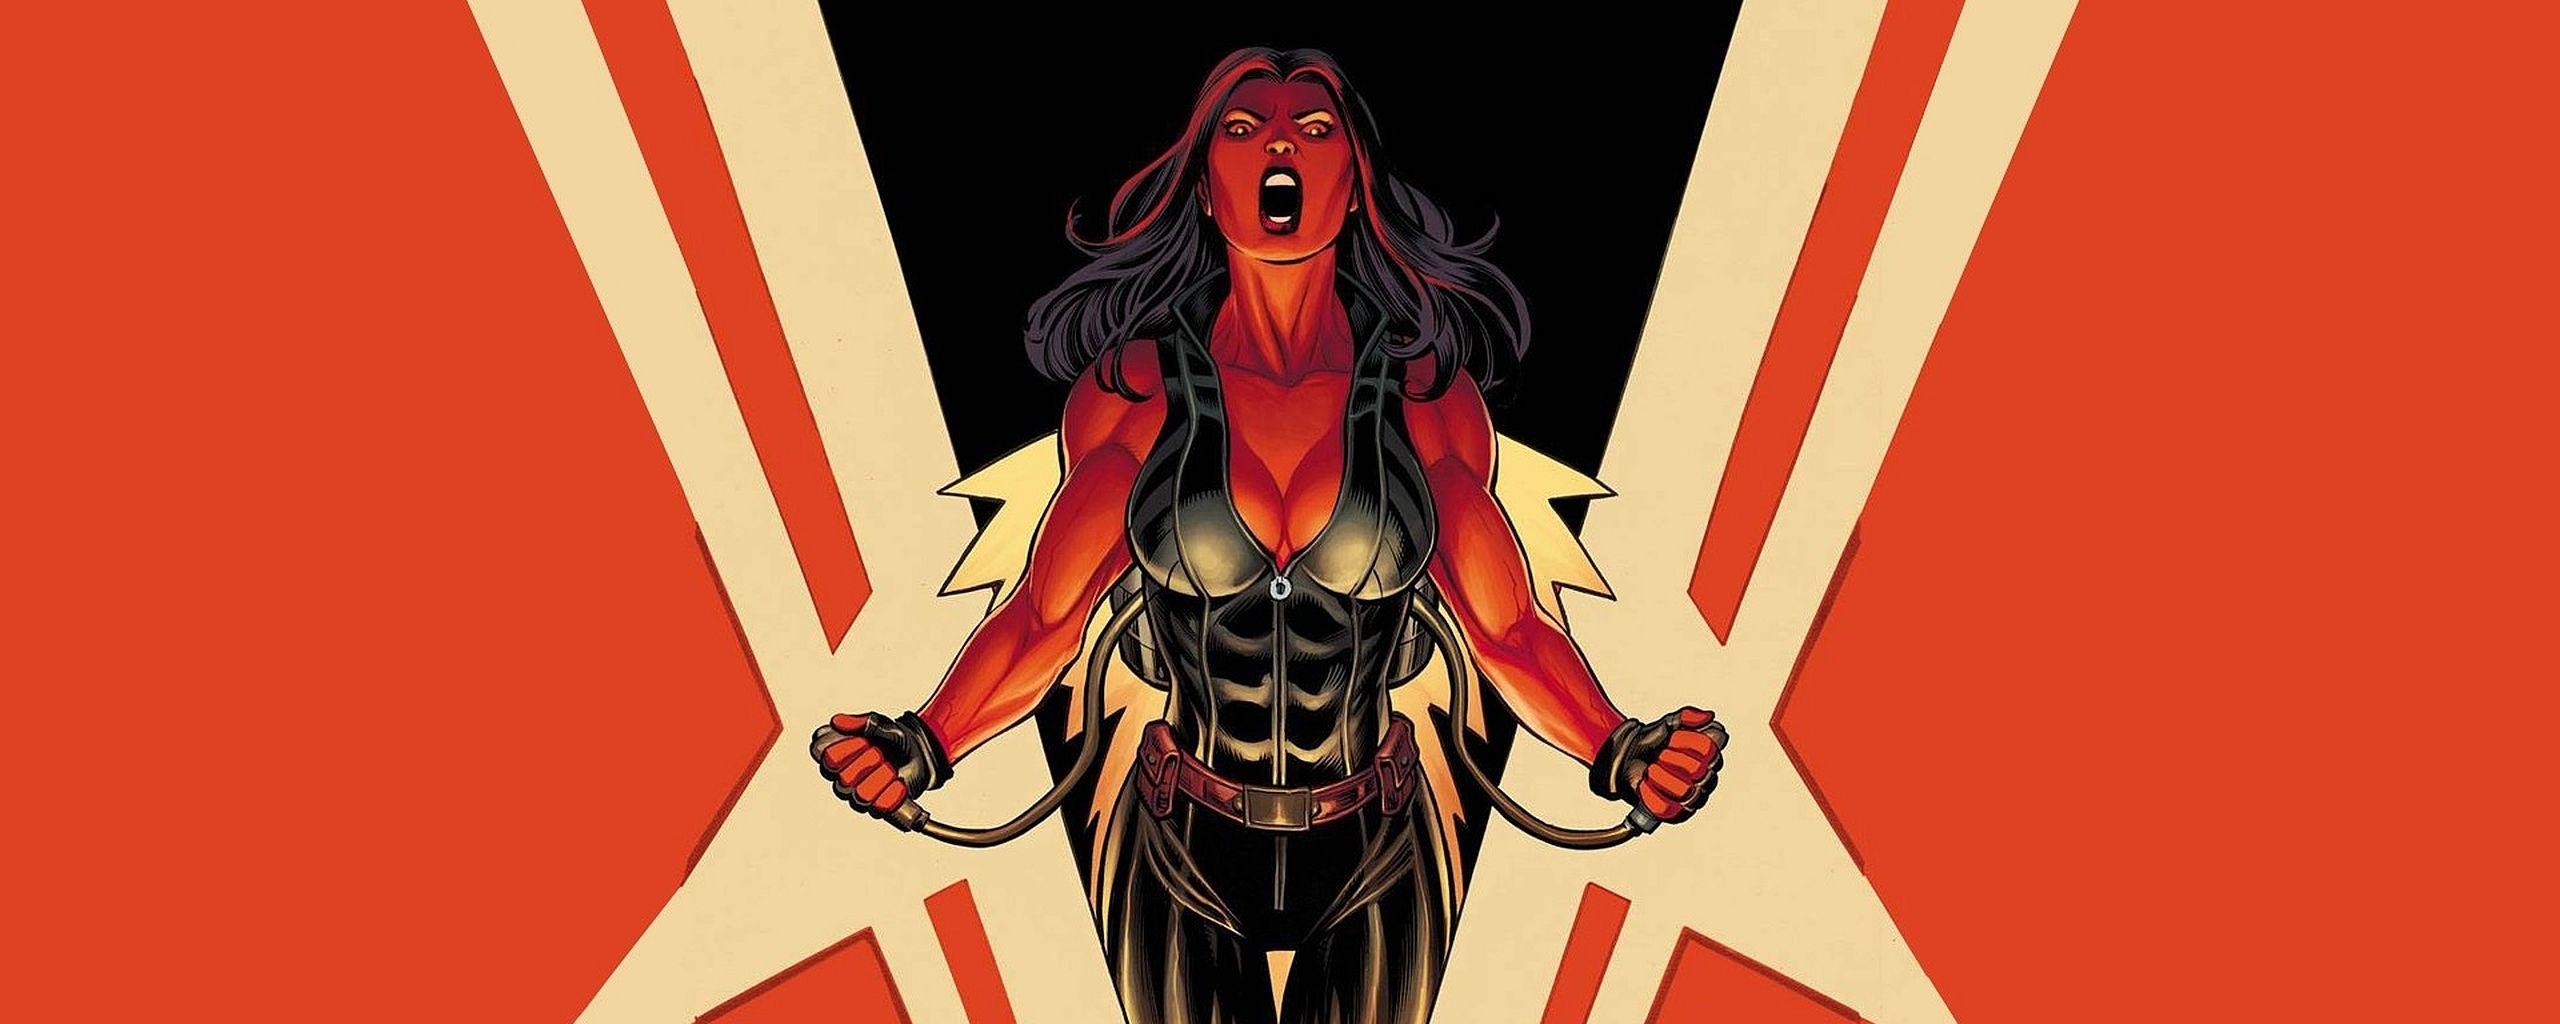 Marvel Red She Hulk 2560x1024 Resolution Wallpaper, HD Superheroes 4K Wallpaper, Image, Photo And Background